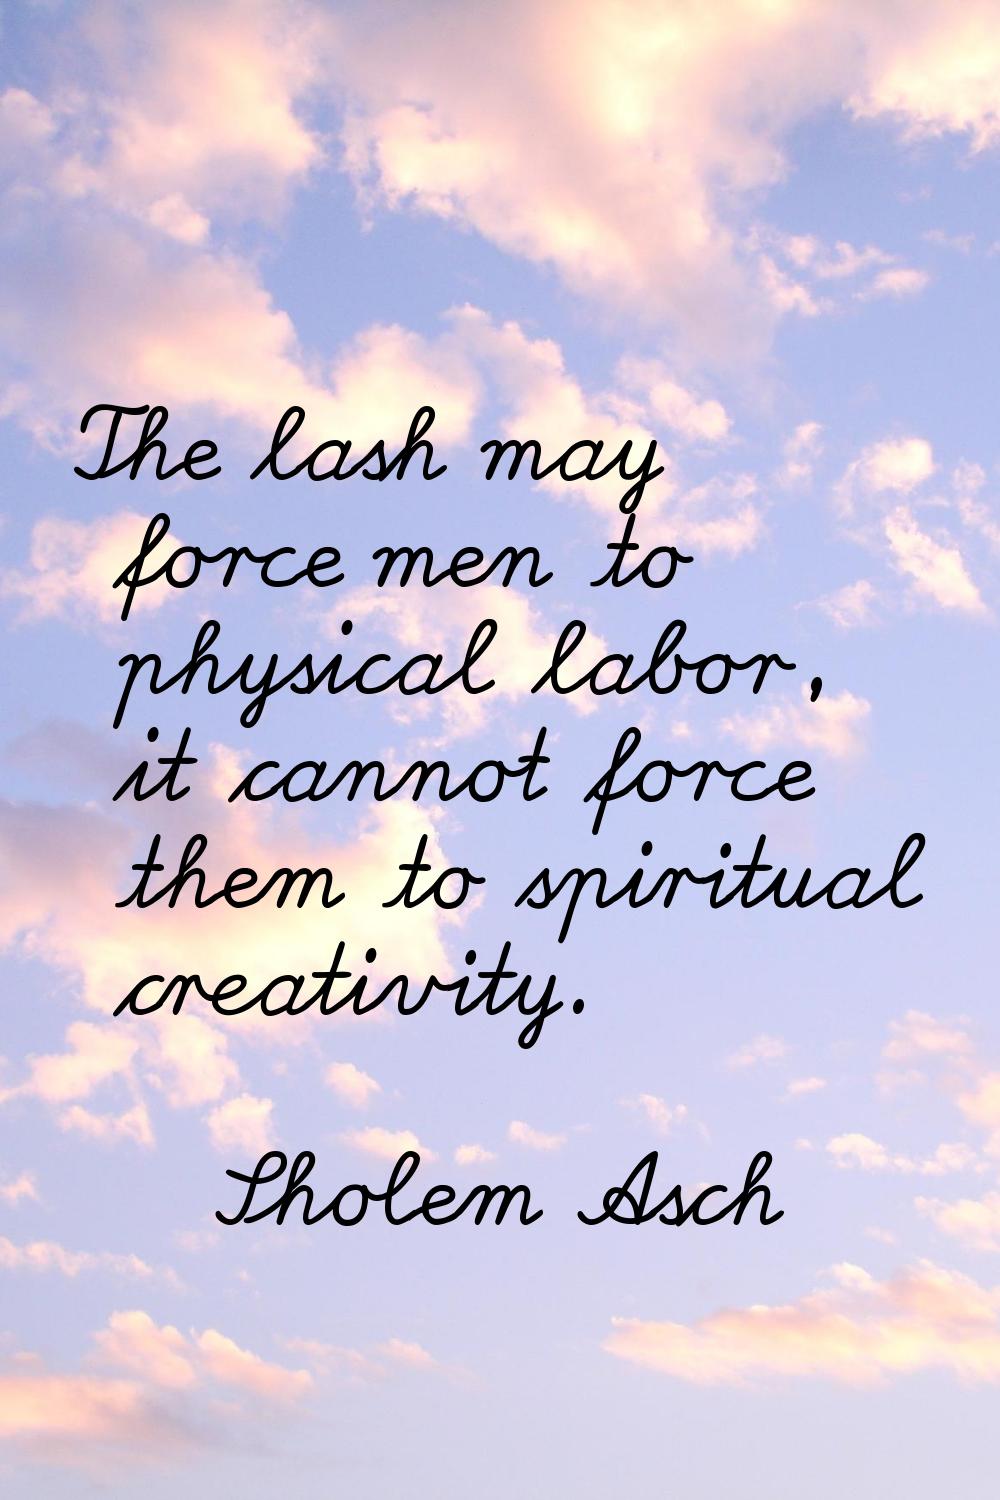 The lash may force men to physical labor, it cannot force them to spiritual creativity.